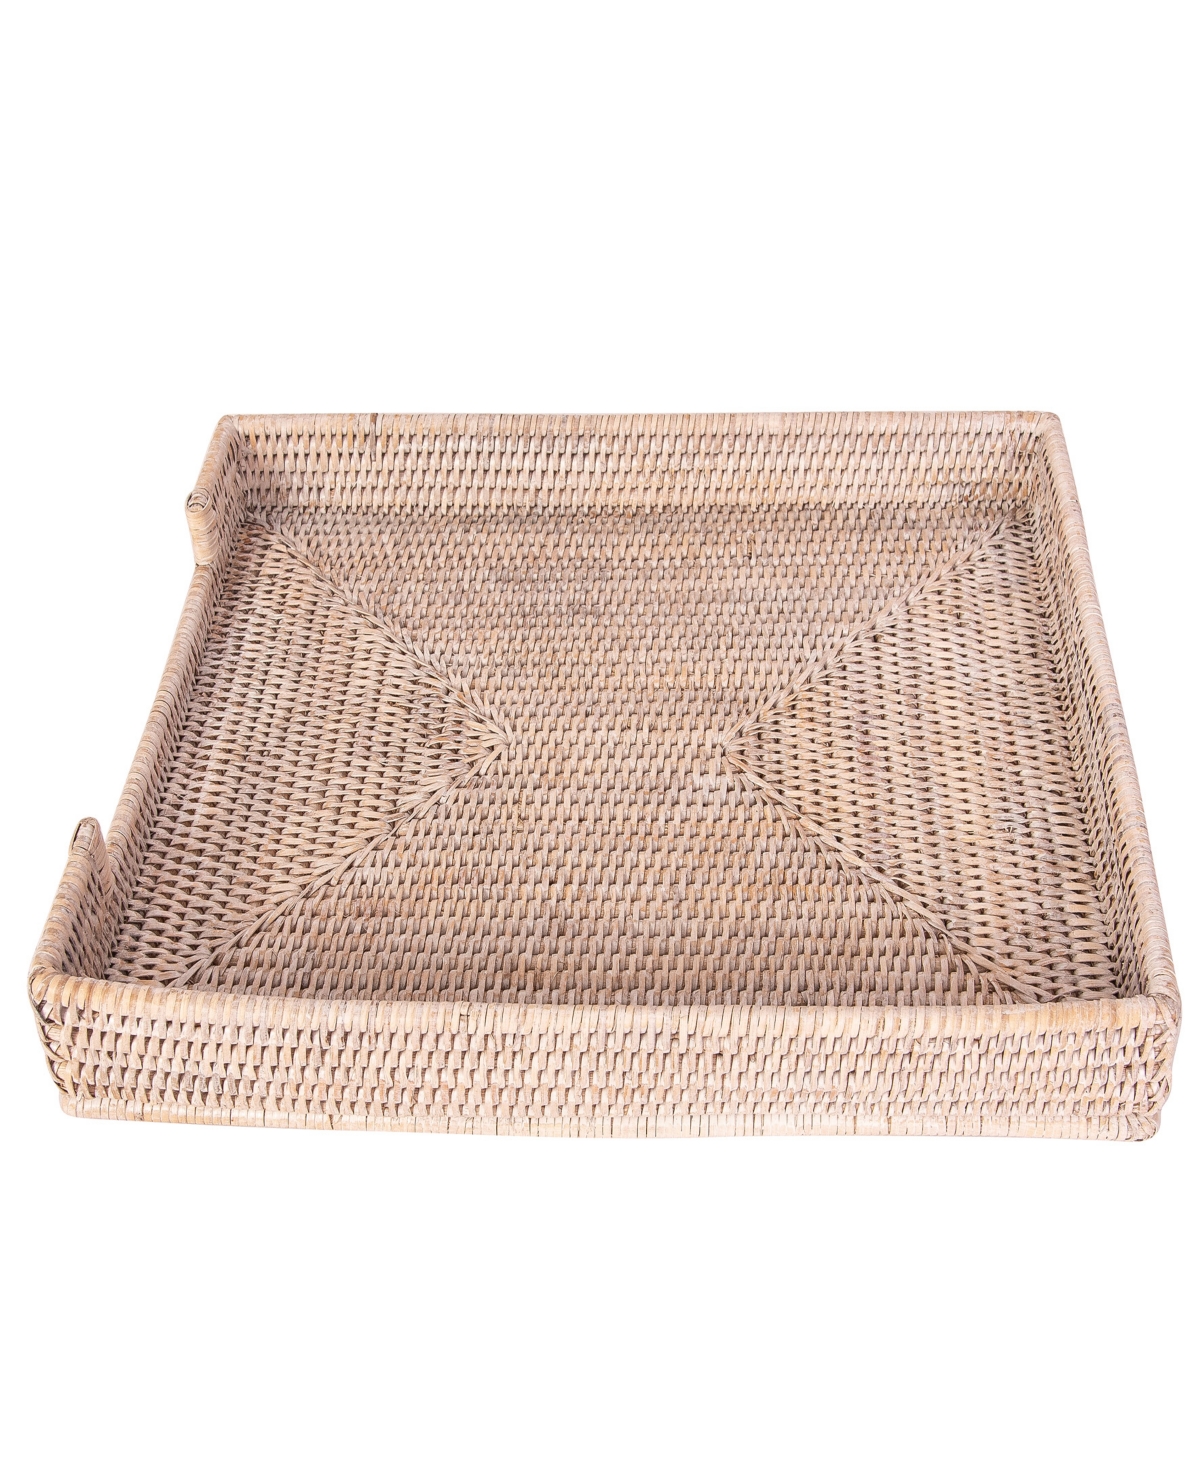 Artifacts Rattan Office Paper Tray - White Wash